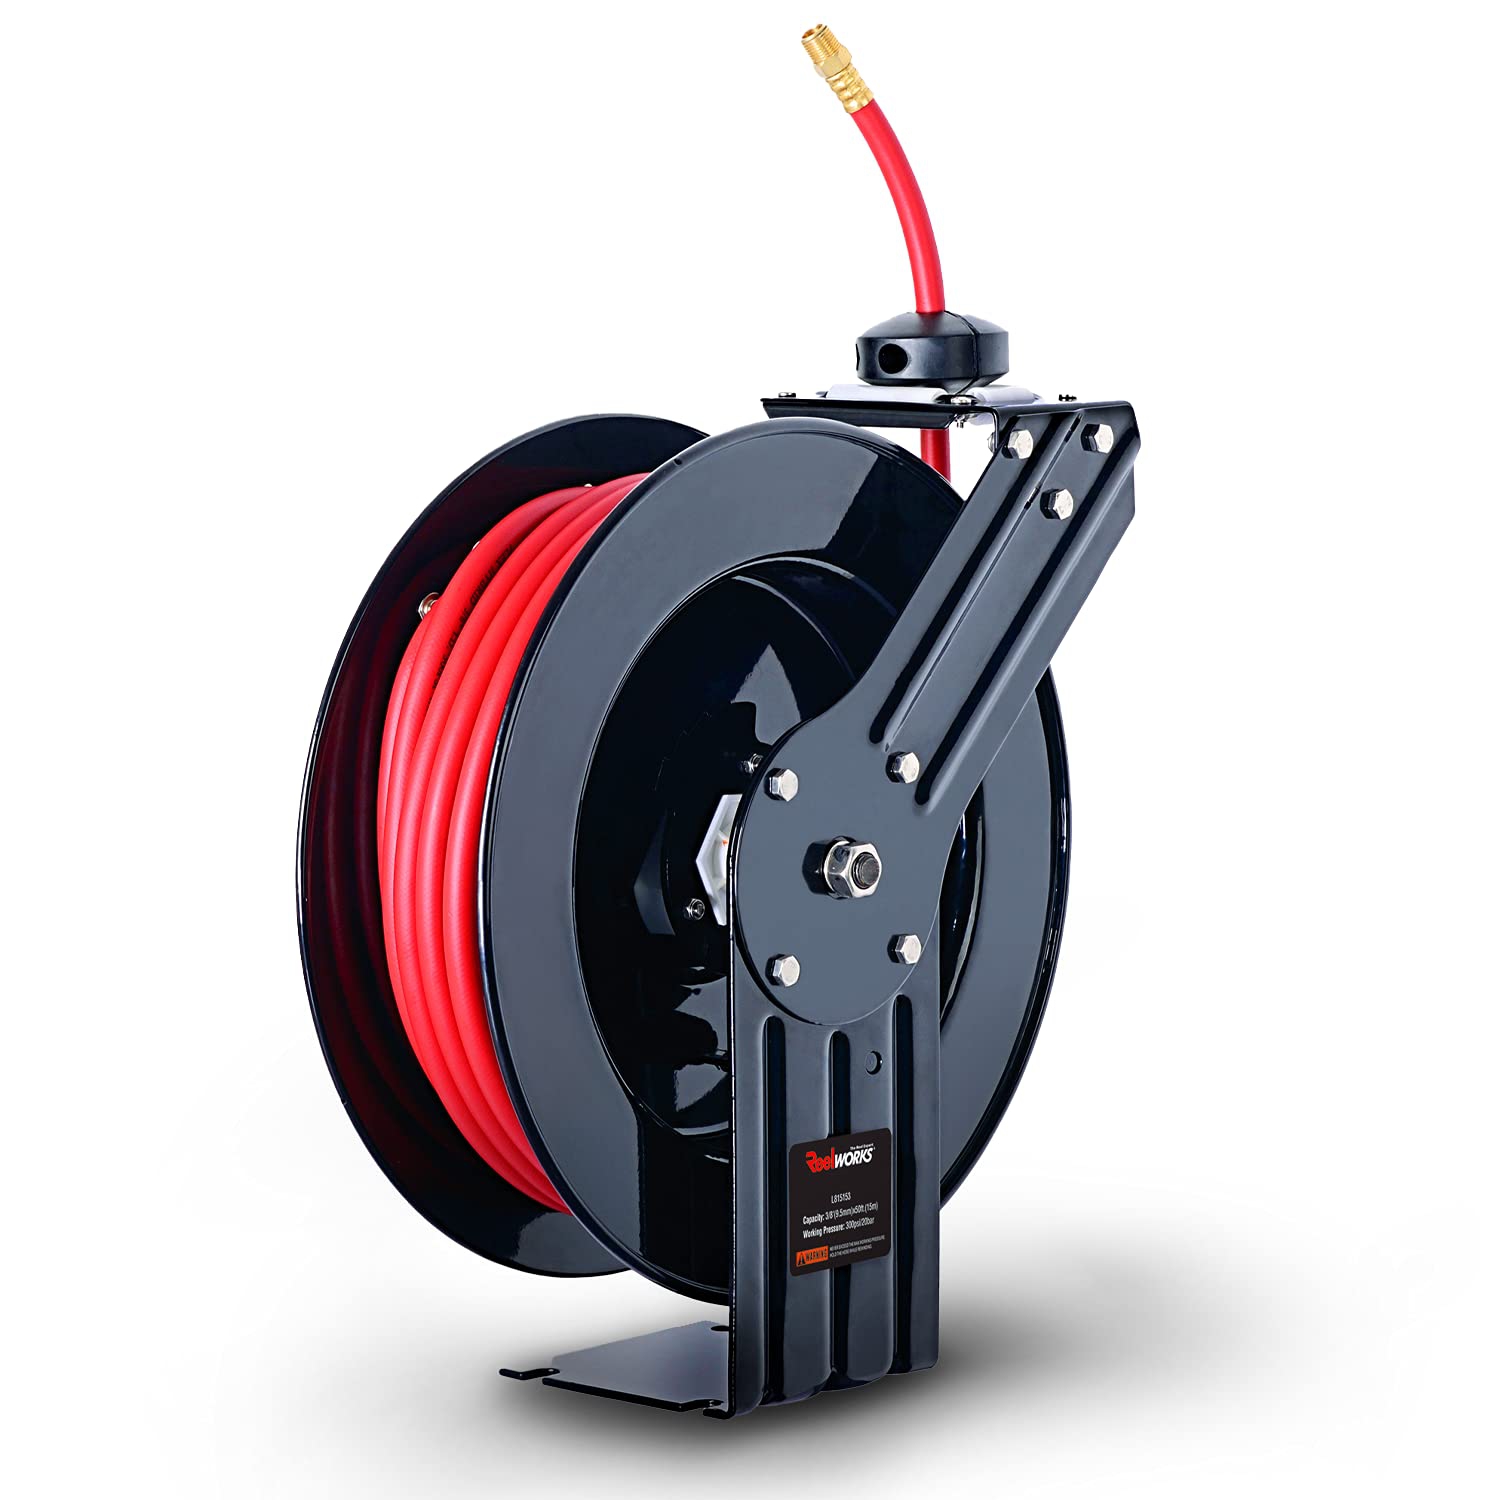 ReelWorks Retractable Air Hose Reel: 9.5mm x 15m Hybrid Polymer Hose, Max 300 PSI, Compressor Water, Plastic Spring-Driven with Swivel Bracket